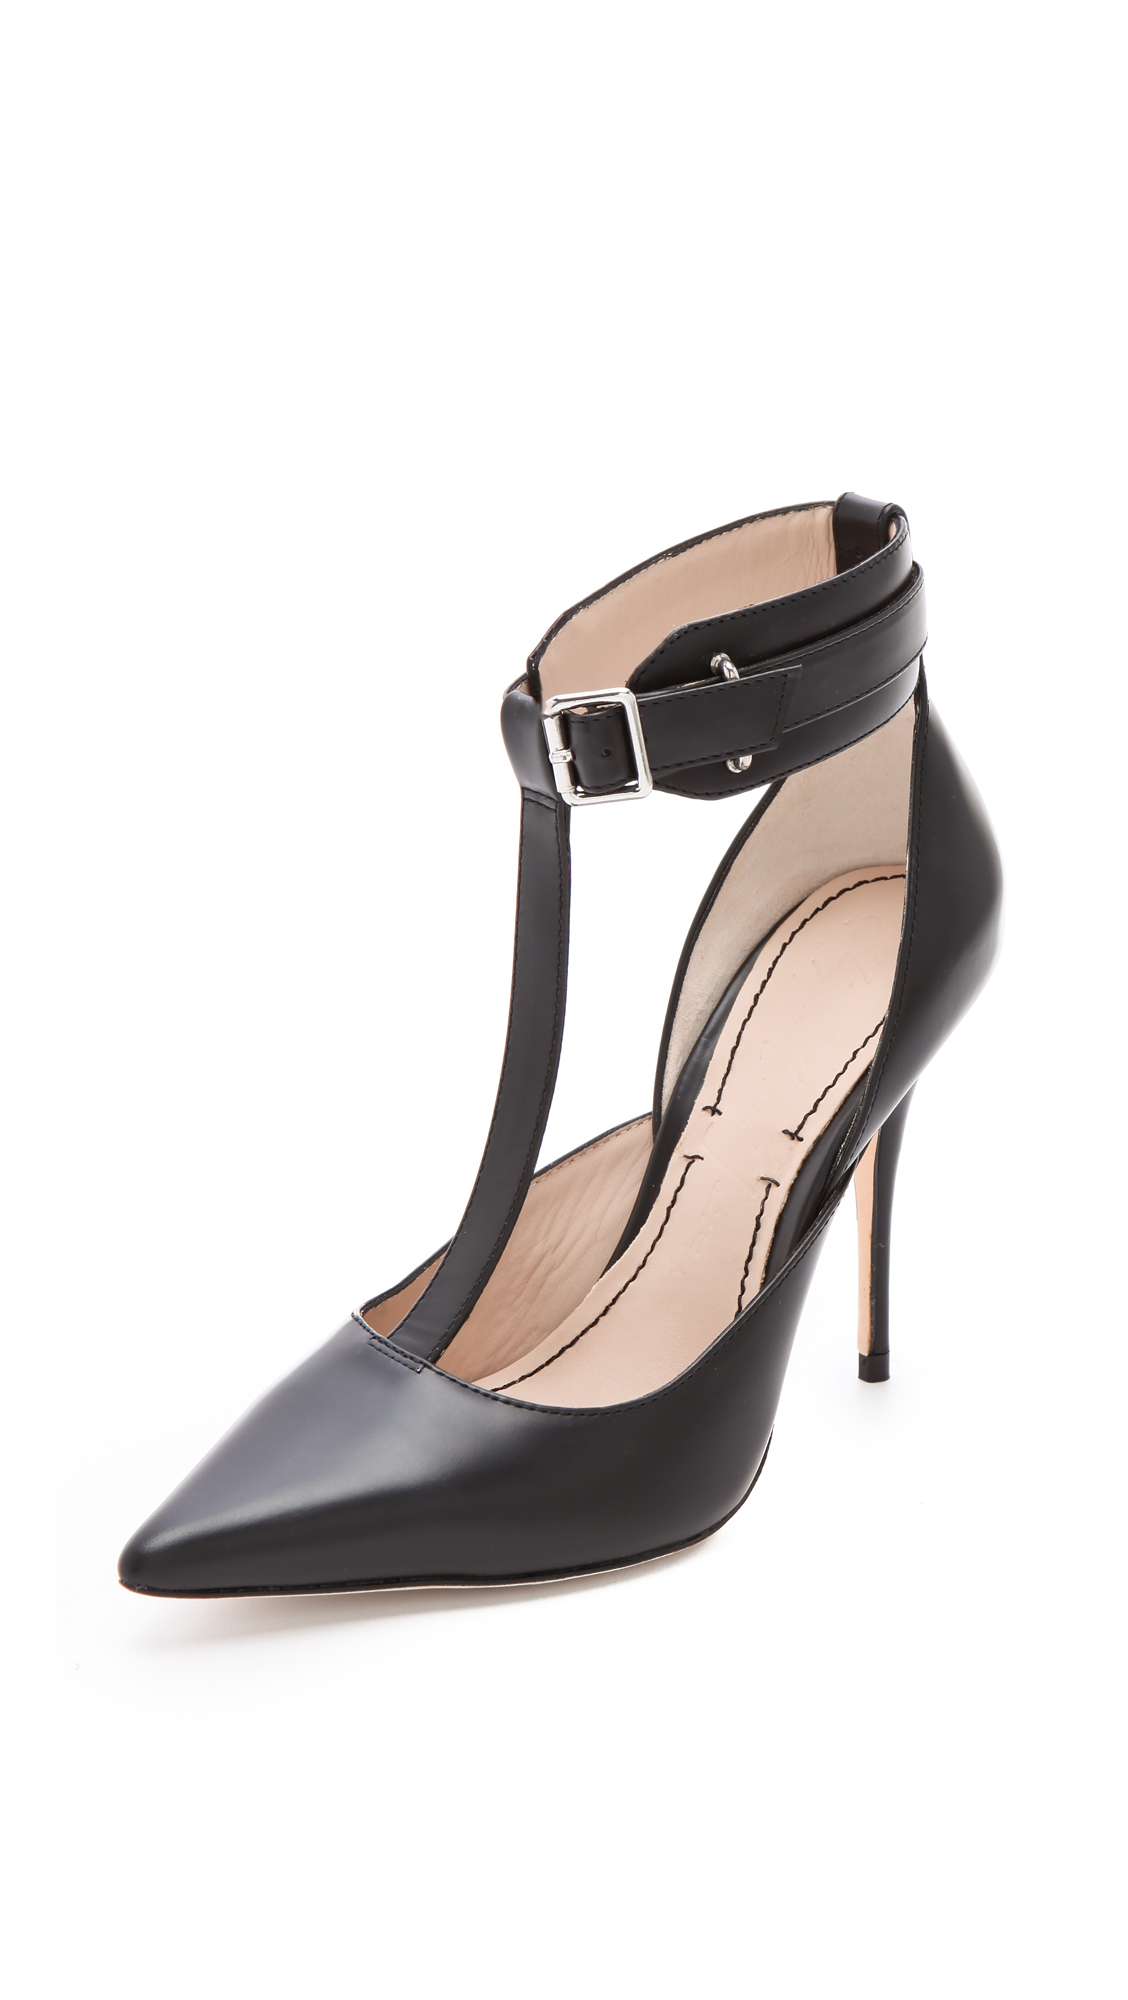 Elizabeth and james Saucy Ankle Cuff Pumps in Black | Lyst